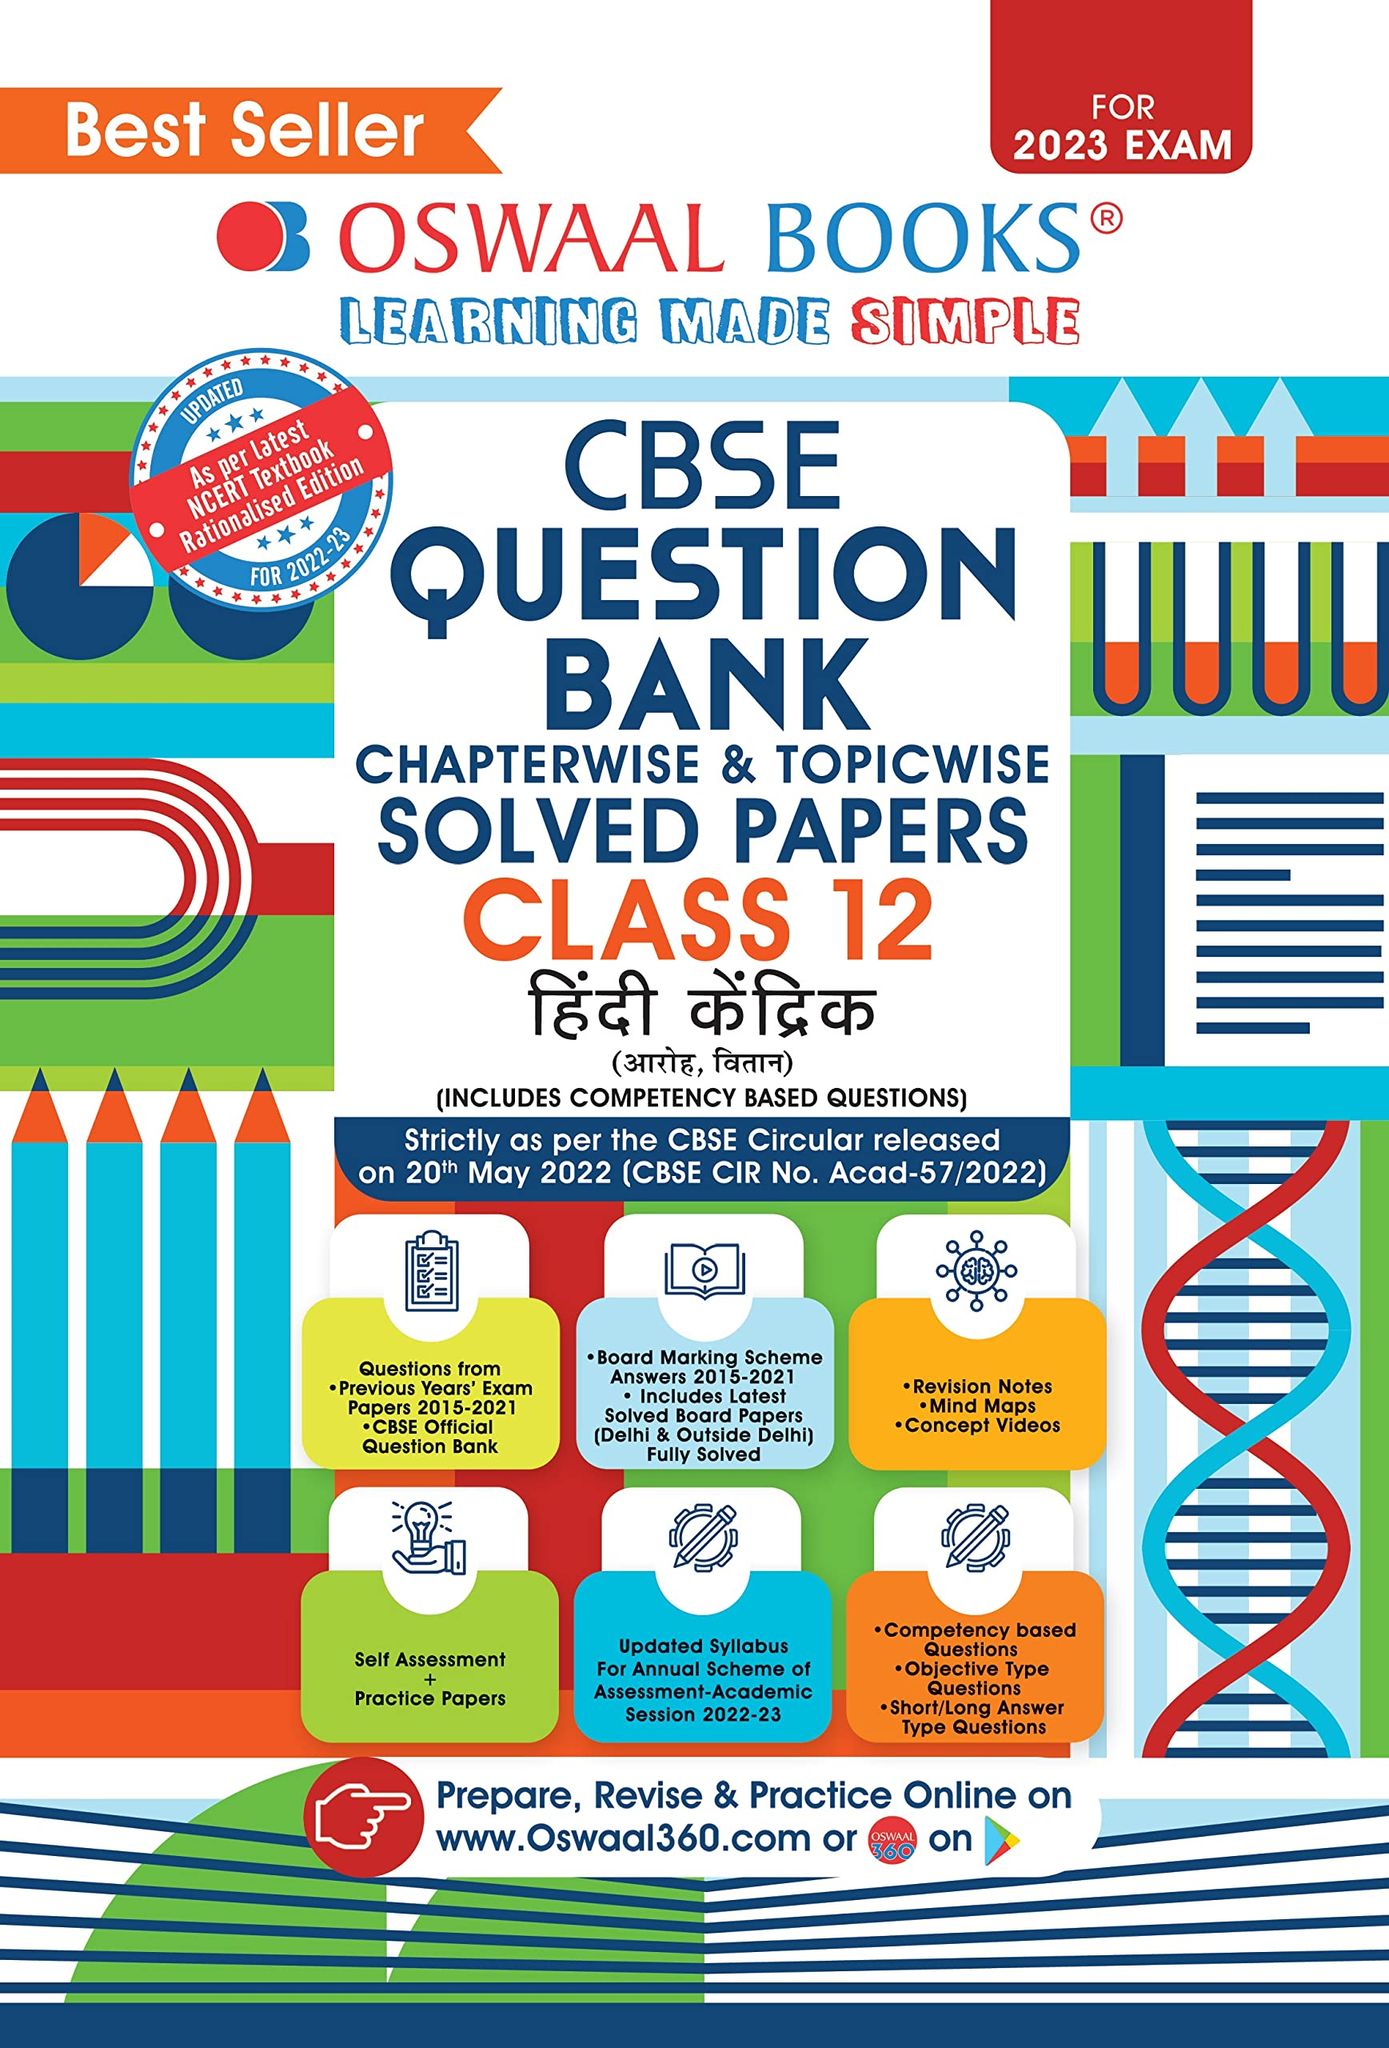 Oswaal CBSE Chapterwise & Topicwise Question Bank Class 12 Hindi Core Hardcover Book (For 2023 Exam) [Hardcover] Oswaal Editorial Board